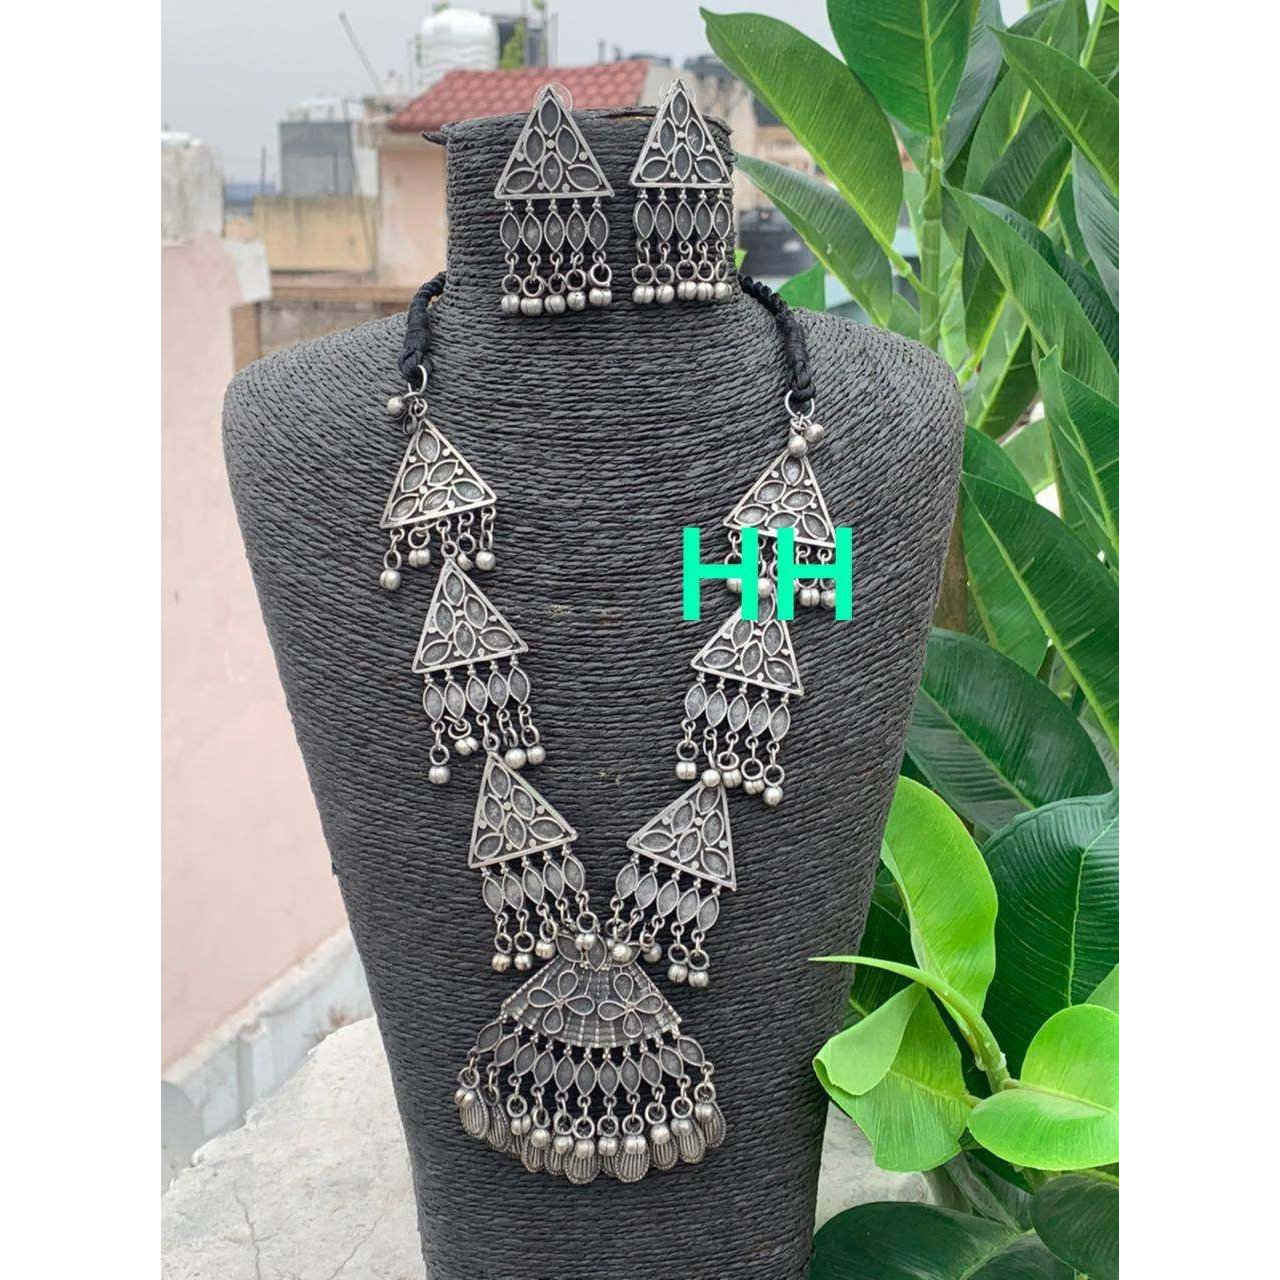 Boho jewellery, Afghani antique necklace set, Tribal necklace, silver black jewelry, long necklace set, Indian jewellery,gifts for her